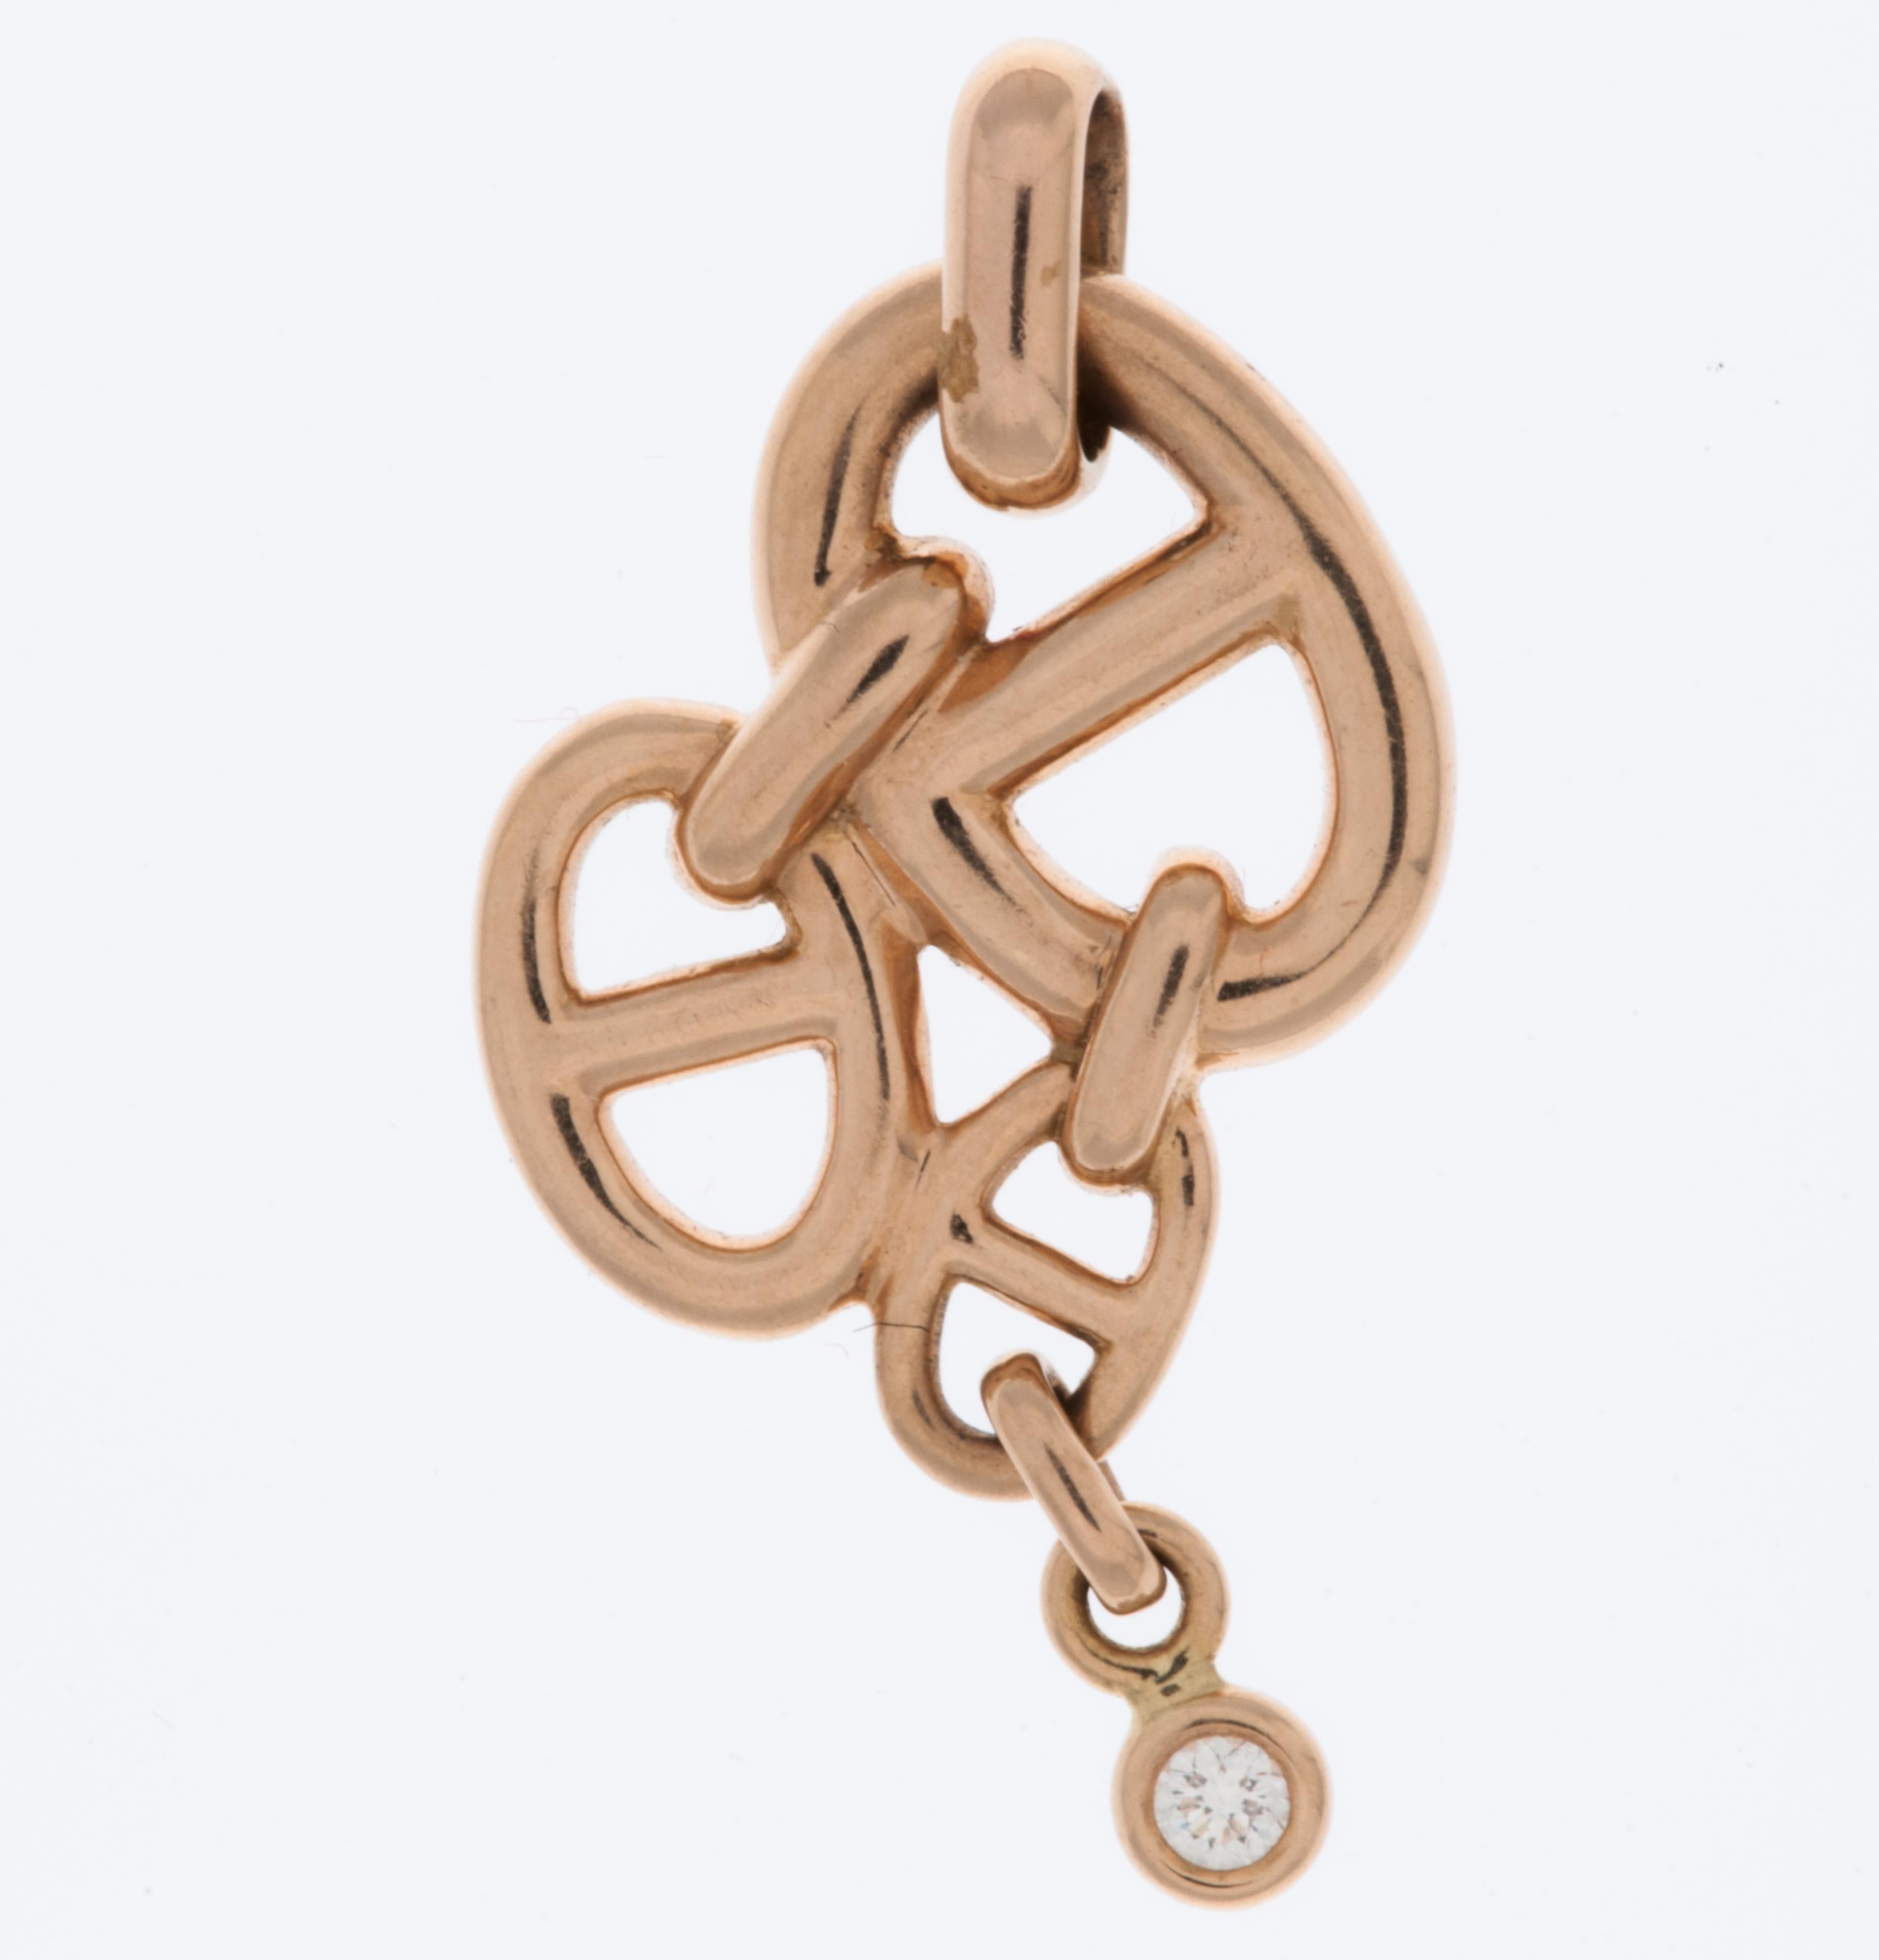 The Hermes Chaine d'Ancre Enchainee Pendant in 18-karat Rose Gold is an exquisite and sophisticated piece that exemplifies the timeless elegance and craftsmanship synonymous with the luxury French brand, Hermès.

The pendant features the iconic